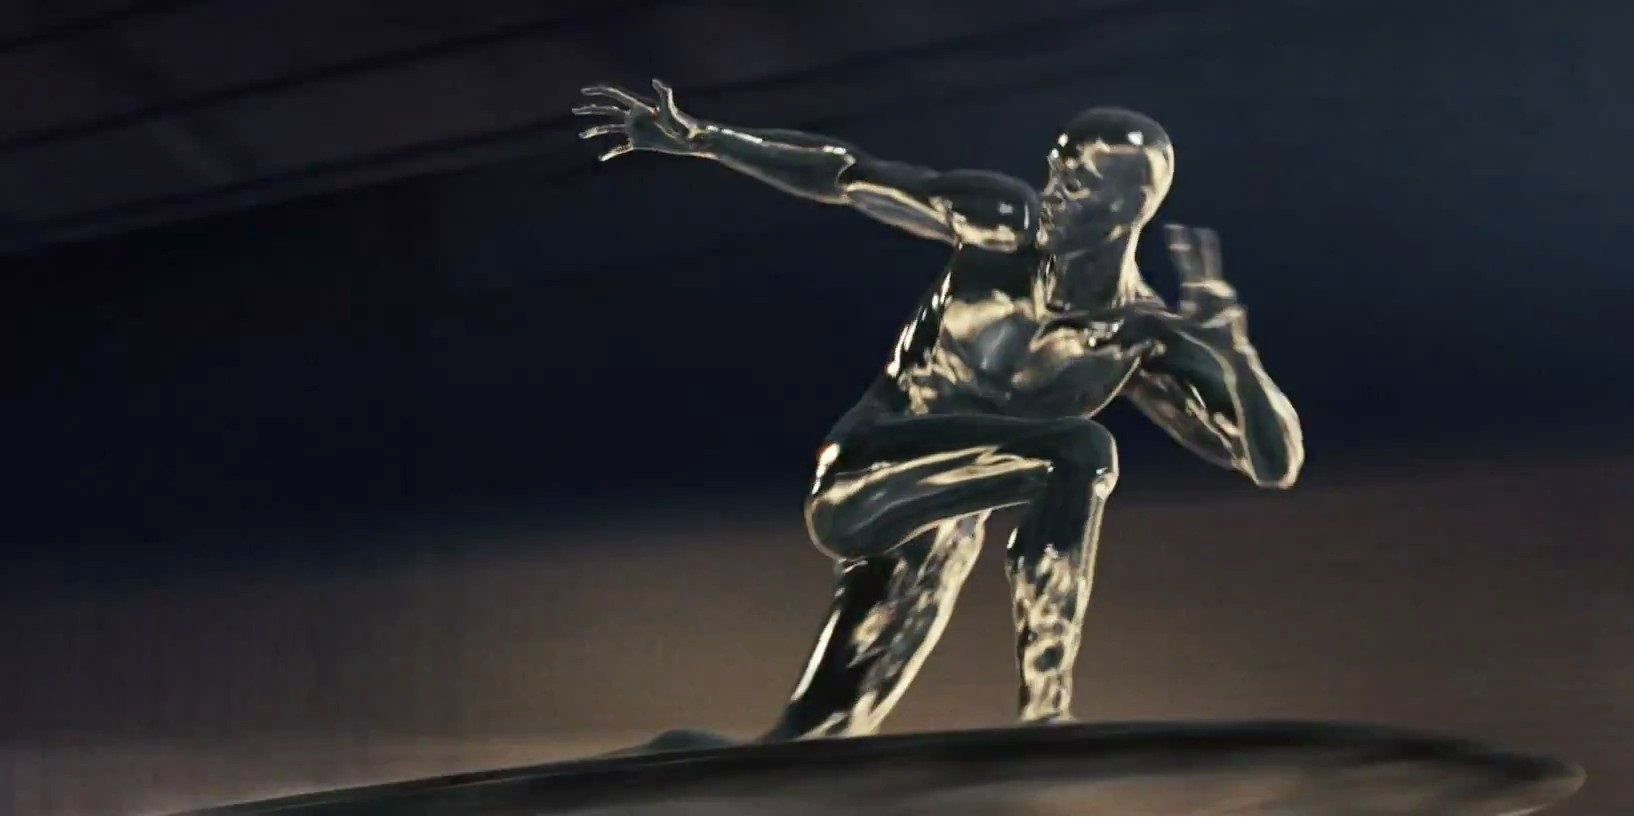 Screenshot of the Silver Surfer